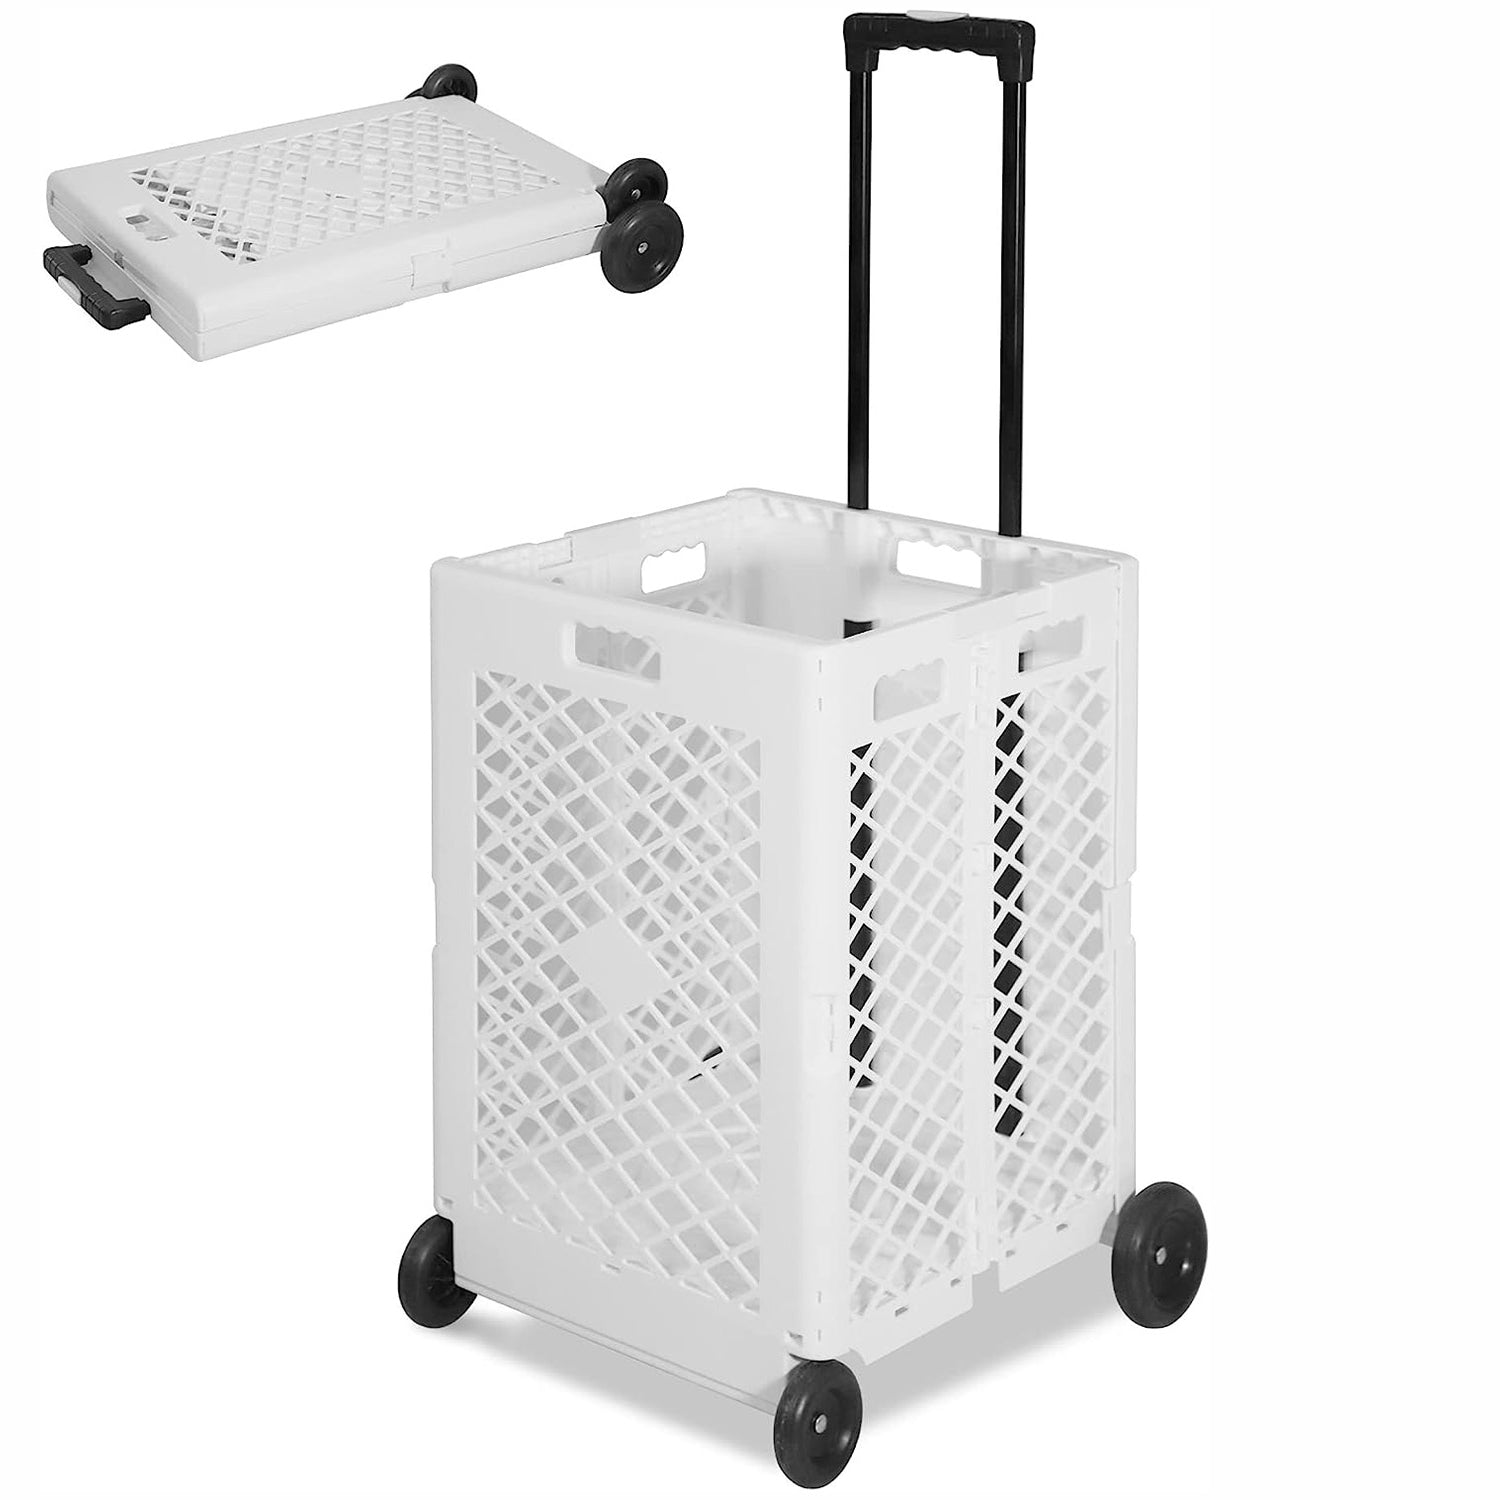 70L Folding Utility Shopping Cart with Wheels Telescopic Handle Collapsible Rolling Crate, White